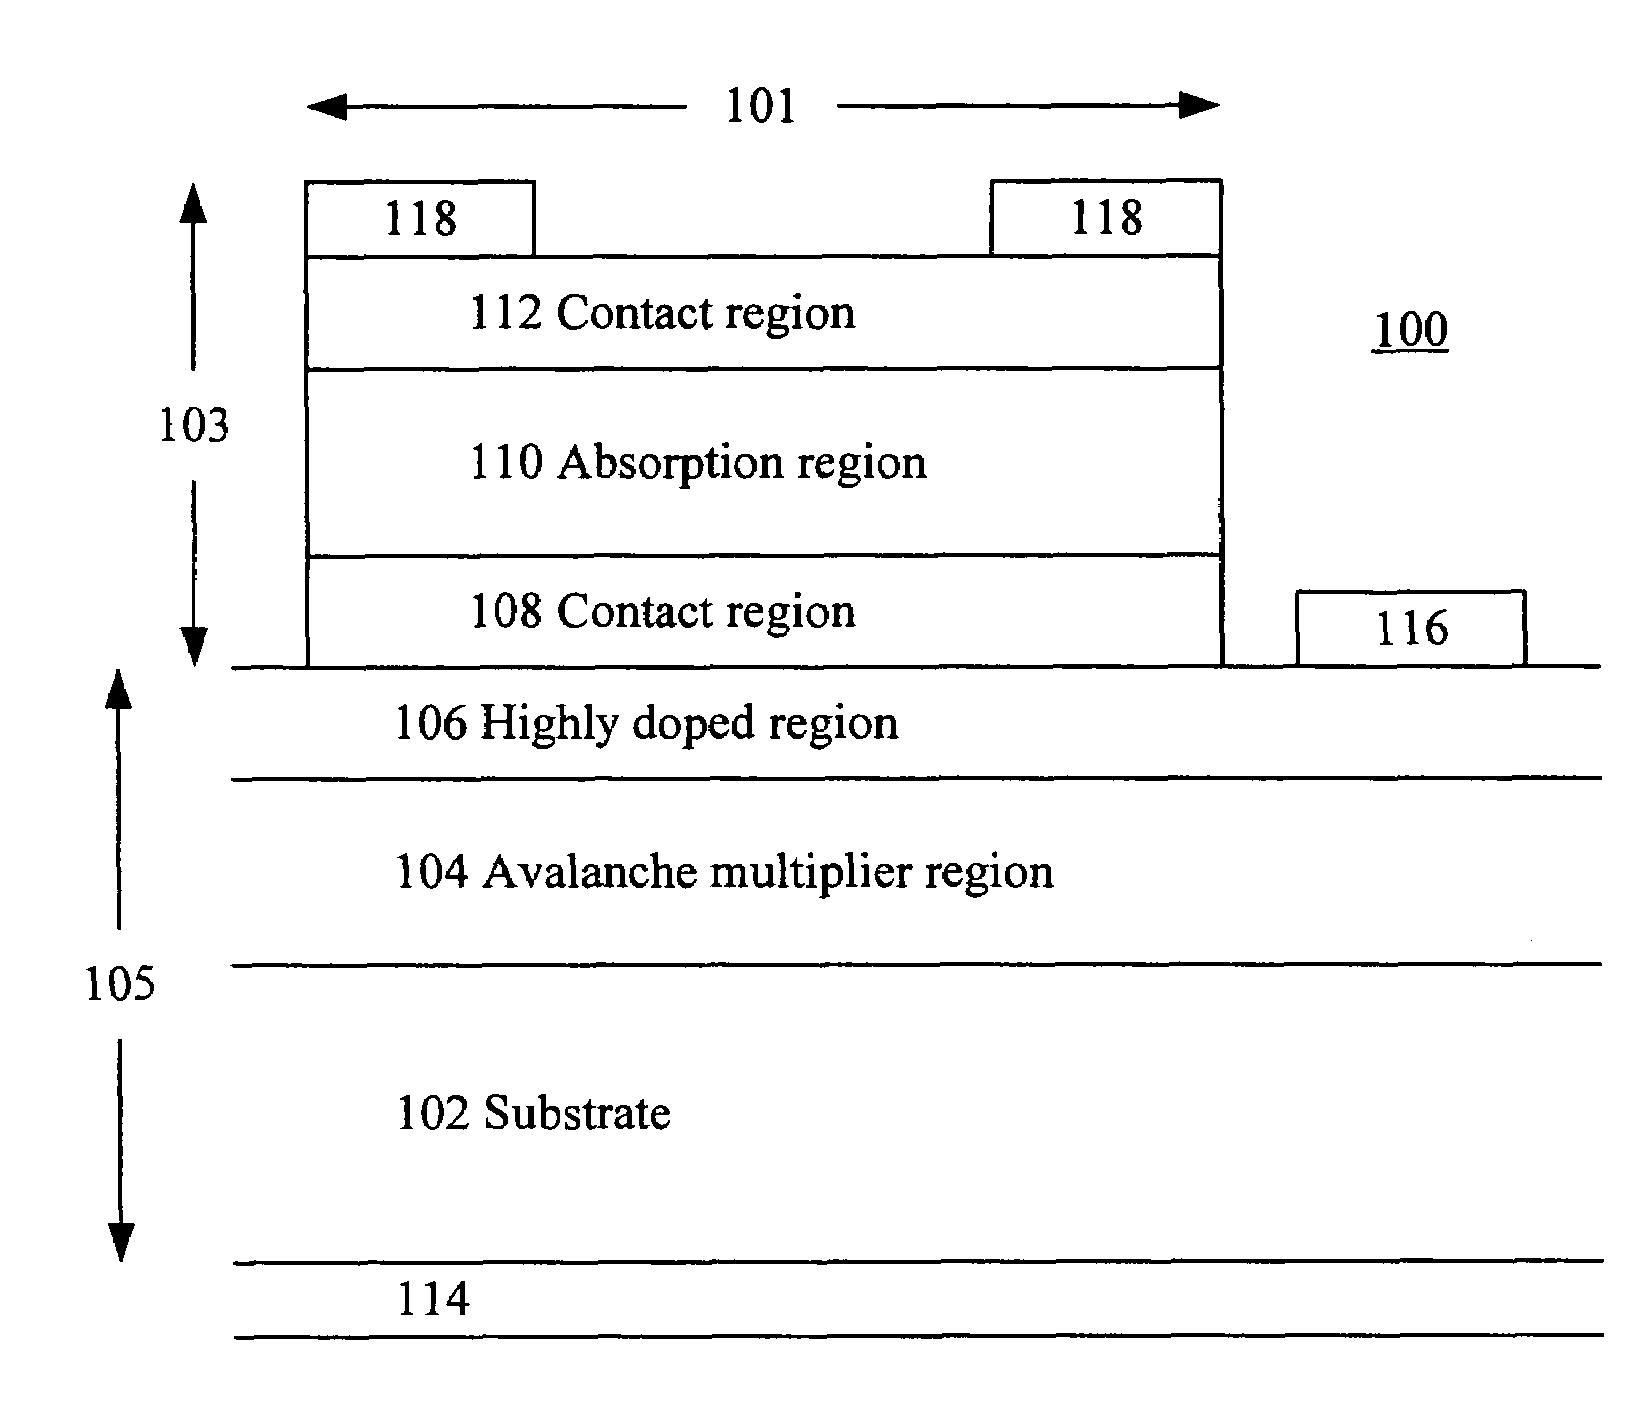 Intersubband detector with avalanche multiplier region